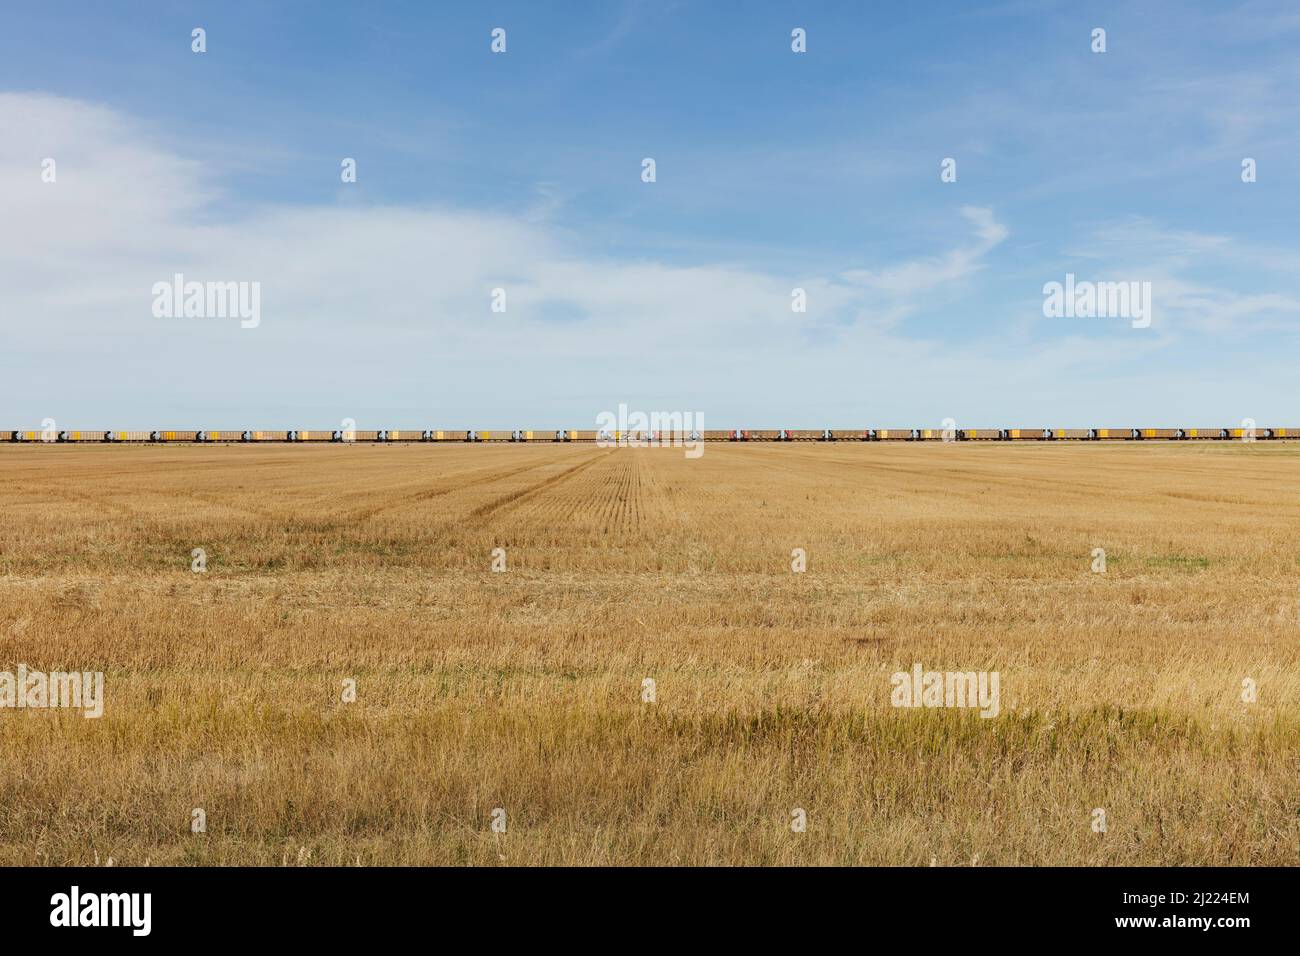 View across a stubble field and the long line of yellow boxcar wagons of a freight train on the horizon line. Stock Photo